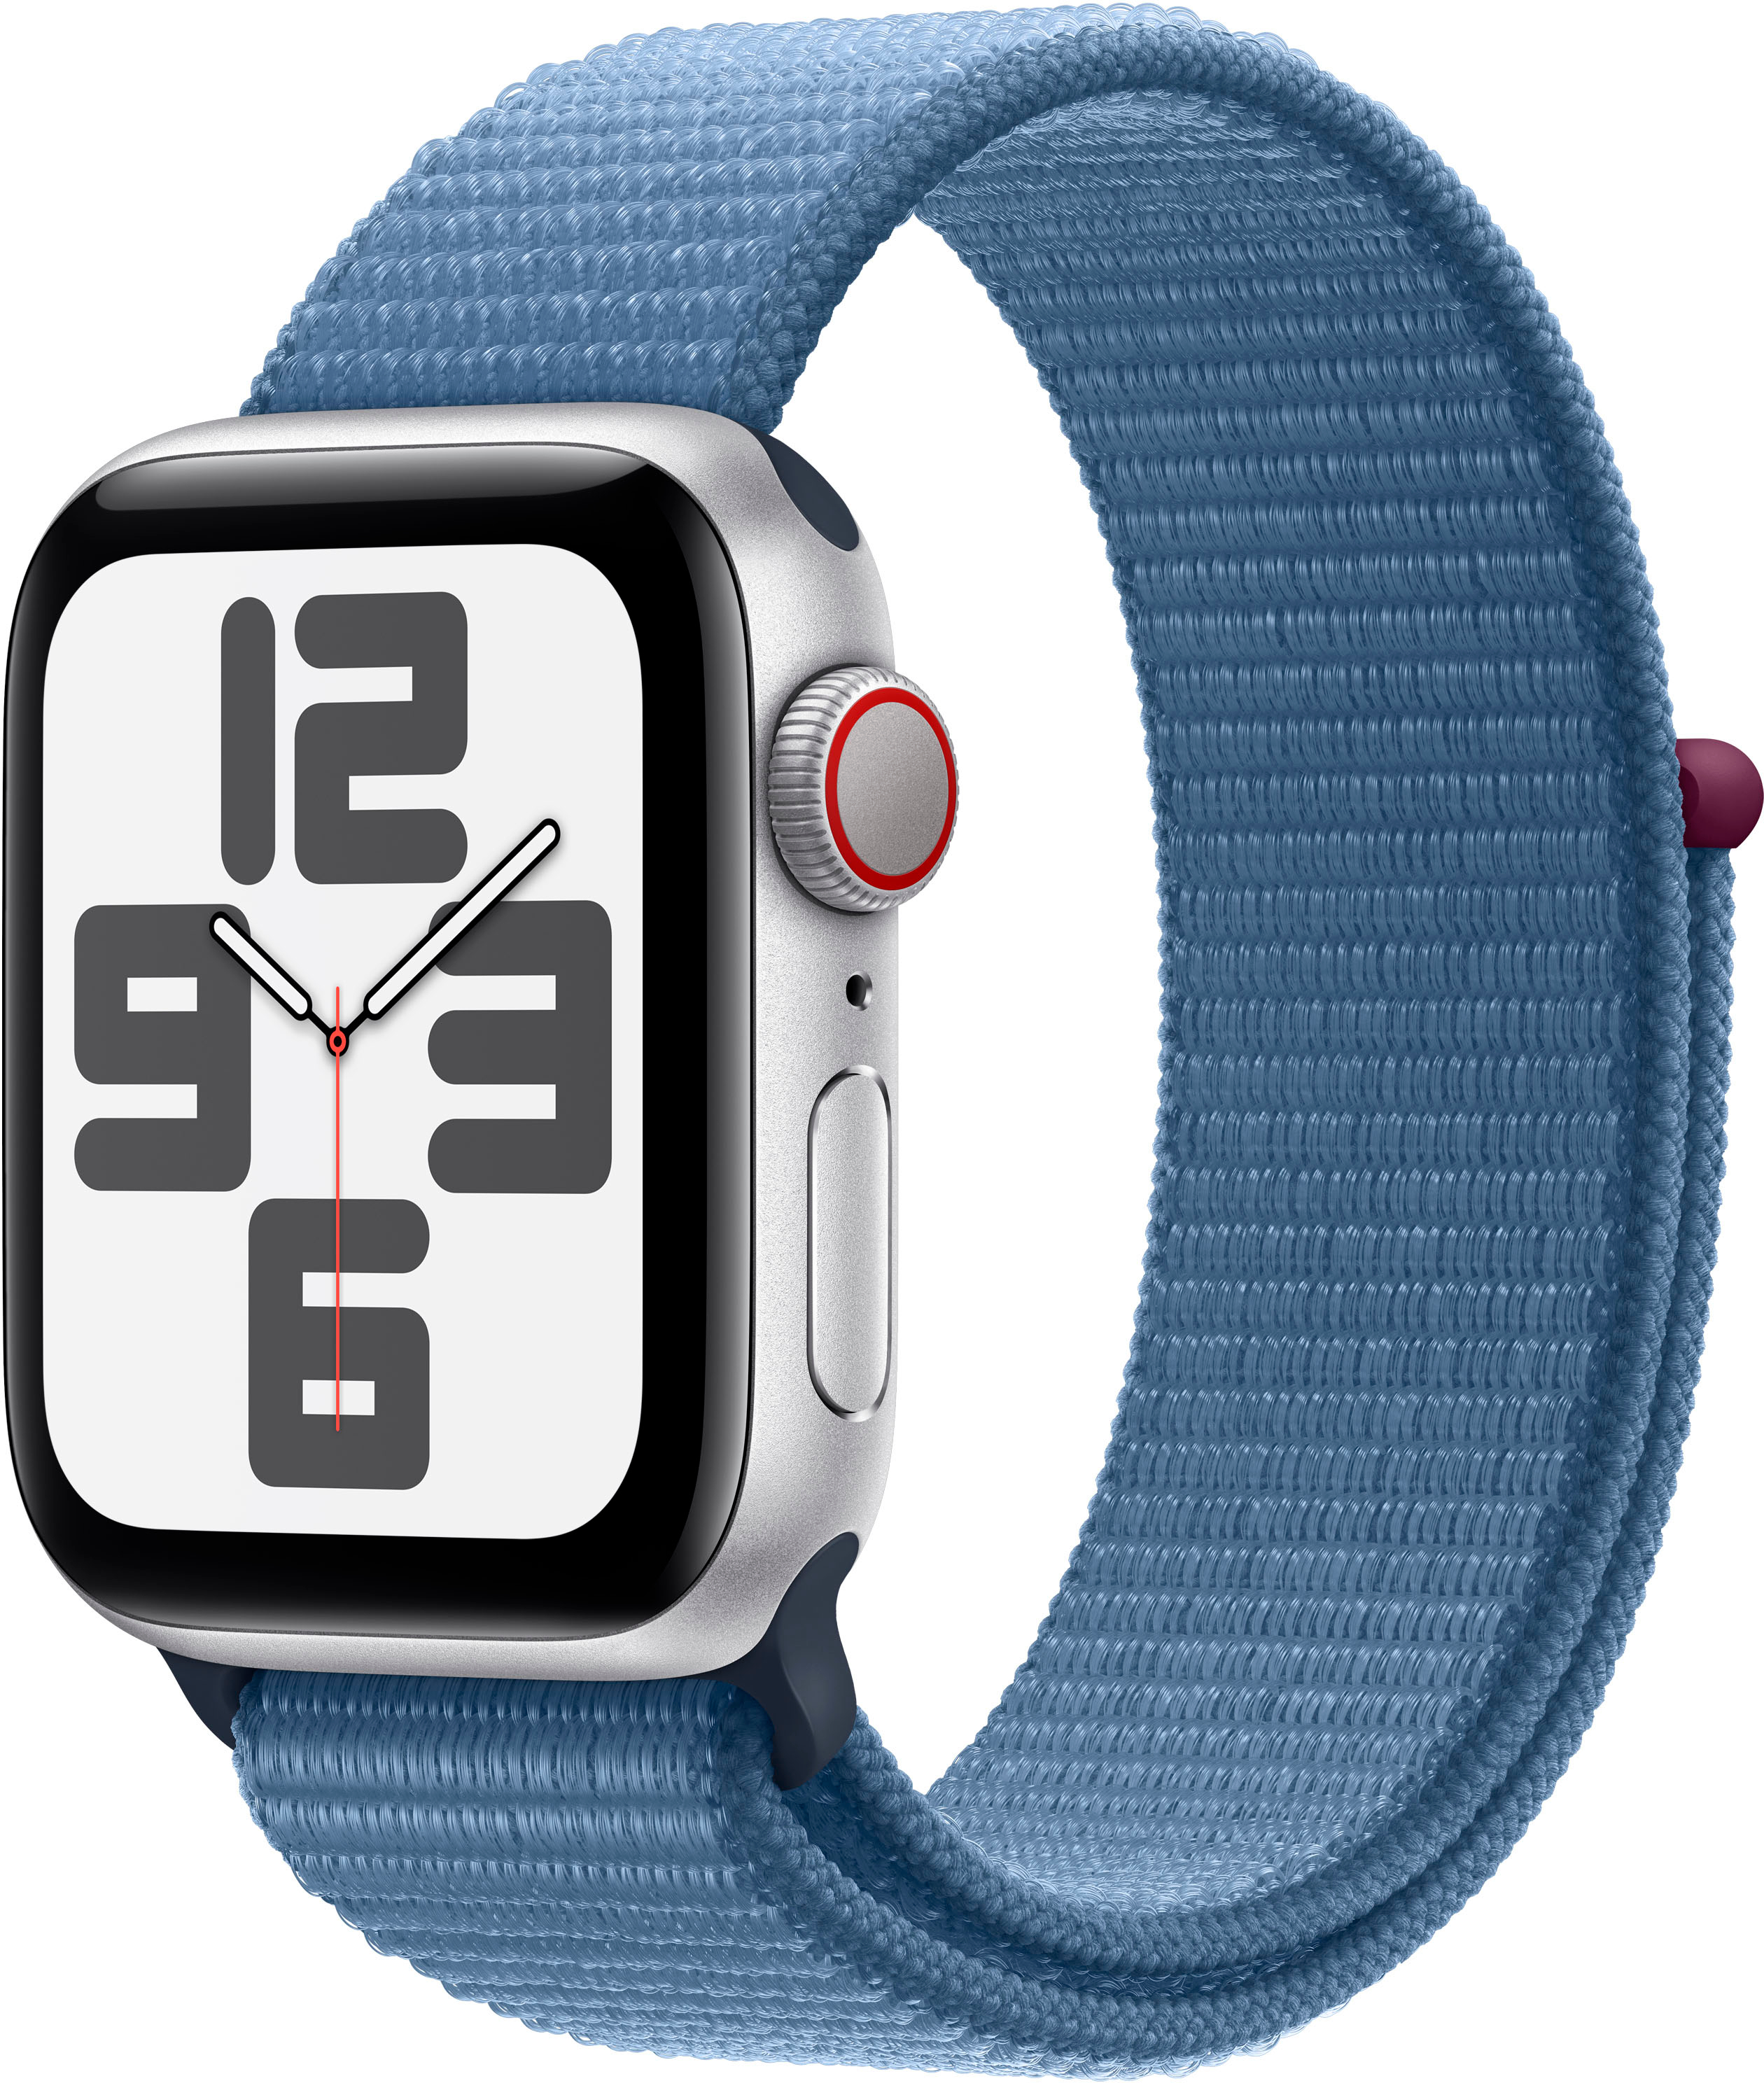 Apple Watch SE MRGP3LL/A 2nd Blue Winter Best (GPS (Verizon) + Generation Silver Silver Cellular) with Loop Aluminum - 40mm Buy Sport Case